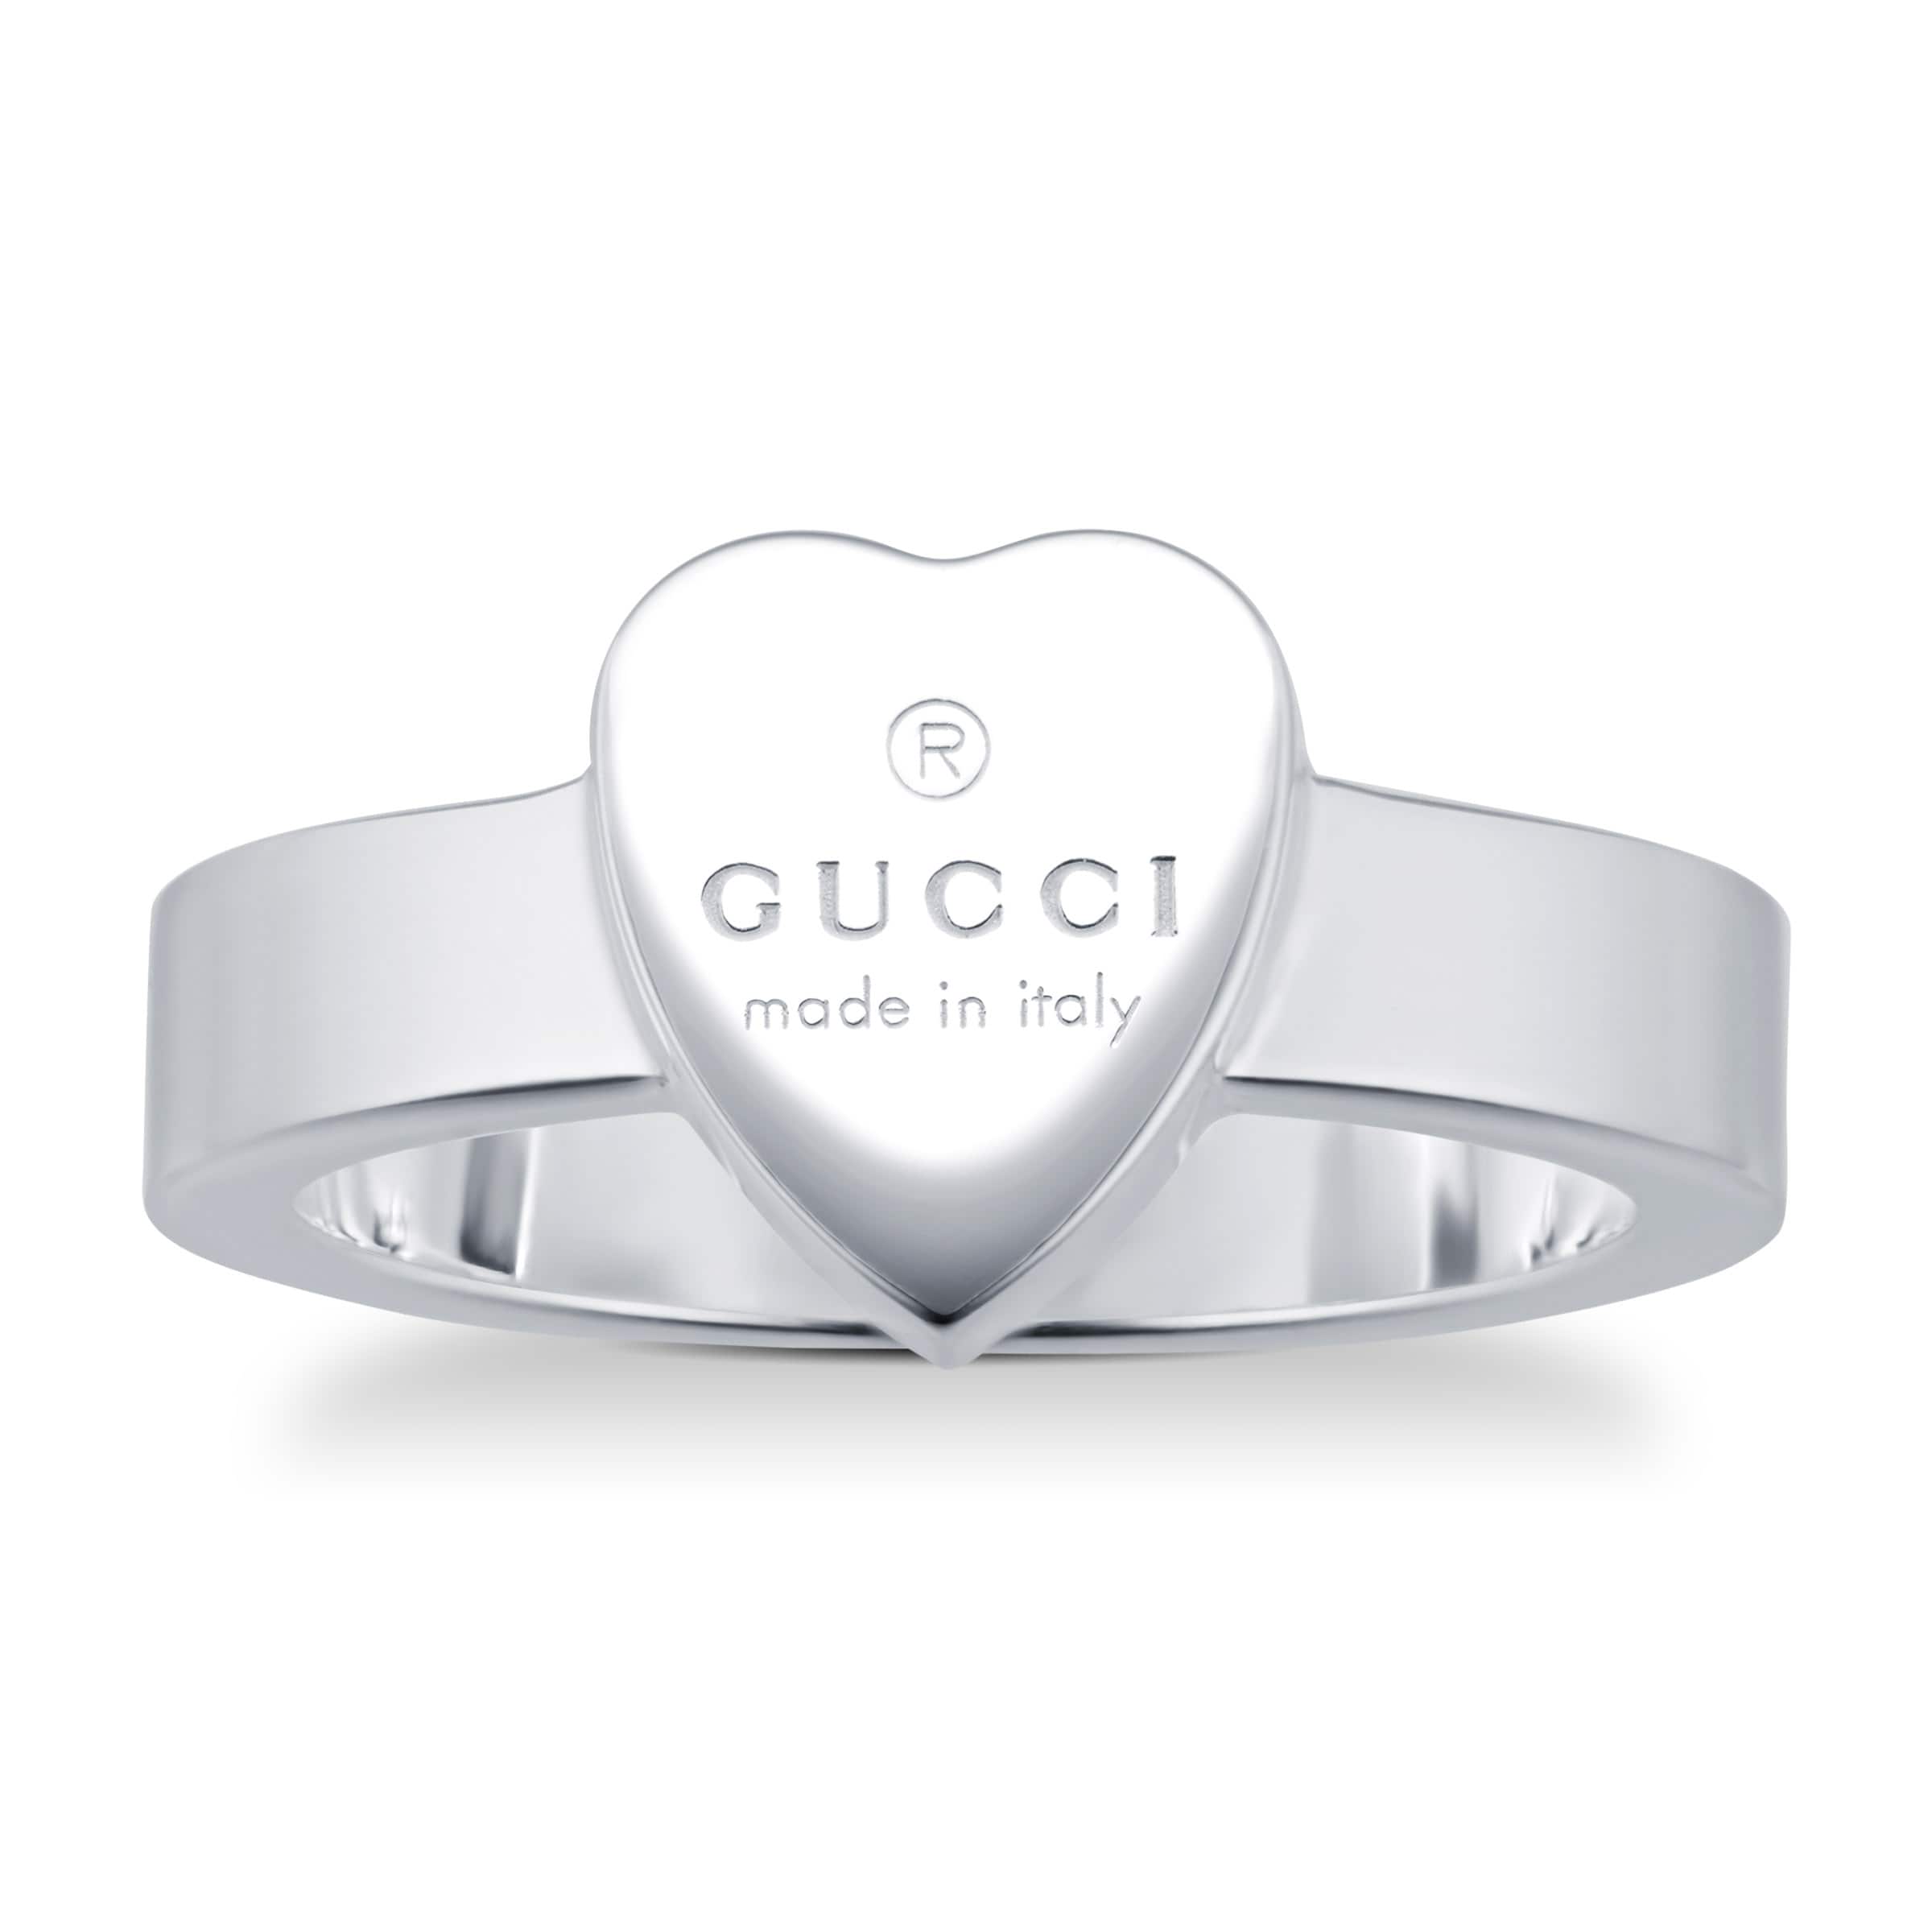 Trademark Silver Heart Ring - Ring Size K.5